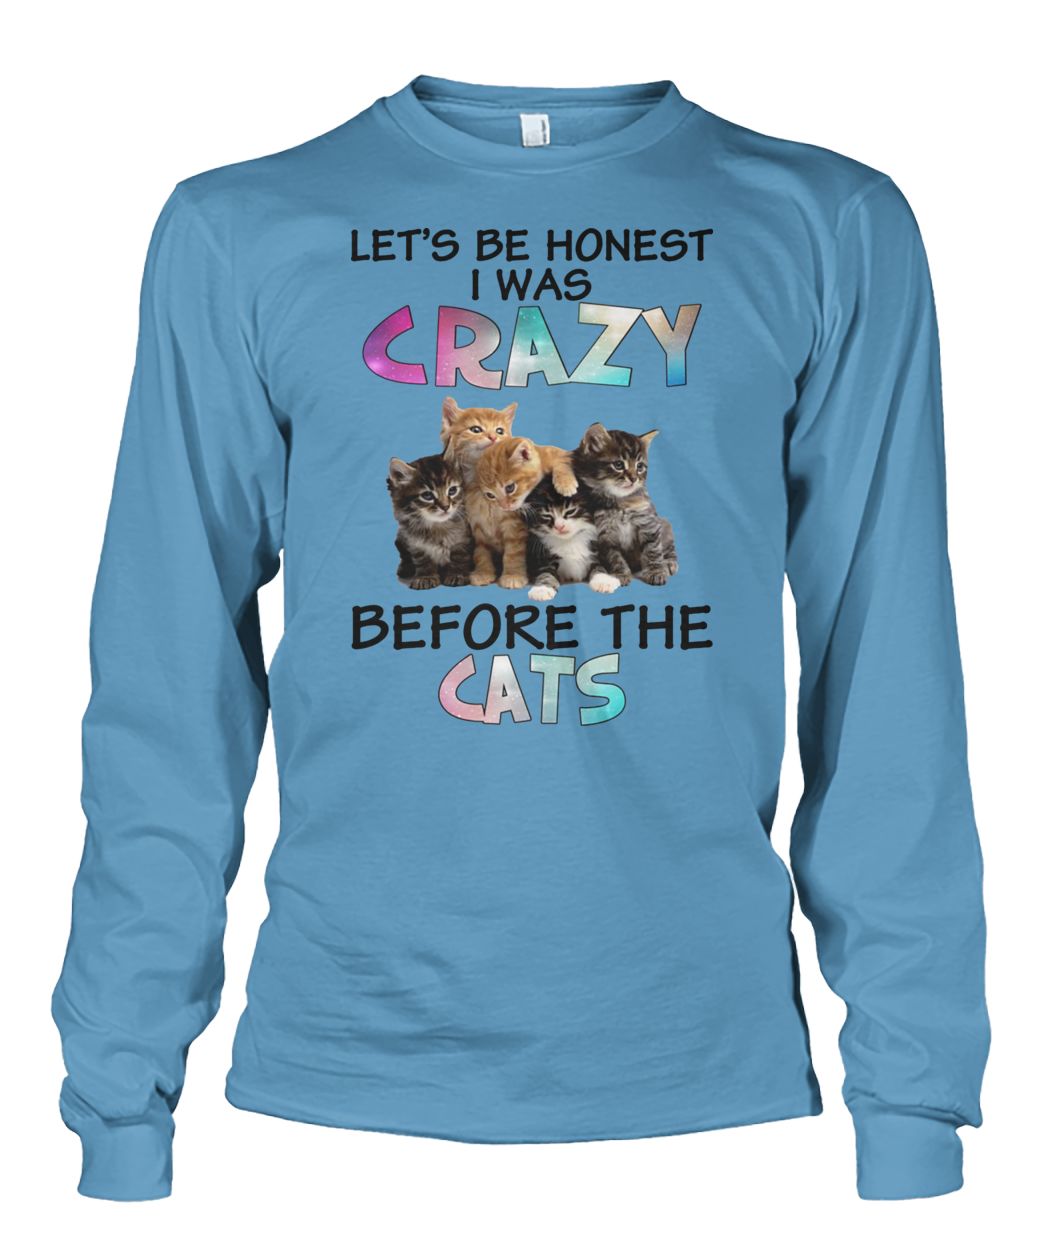 Let's be honest I was crazy before the cats unisex long sleeve